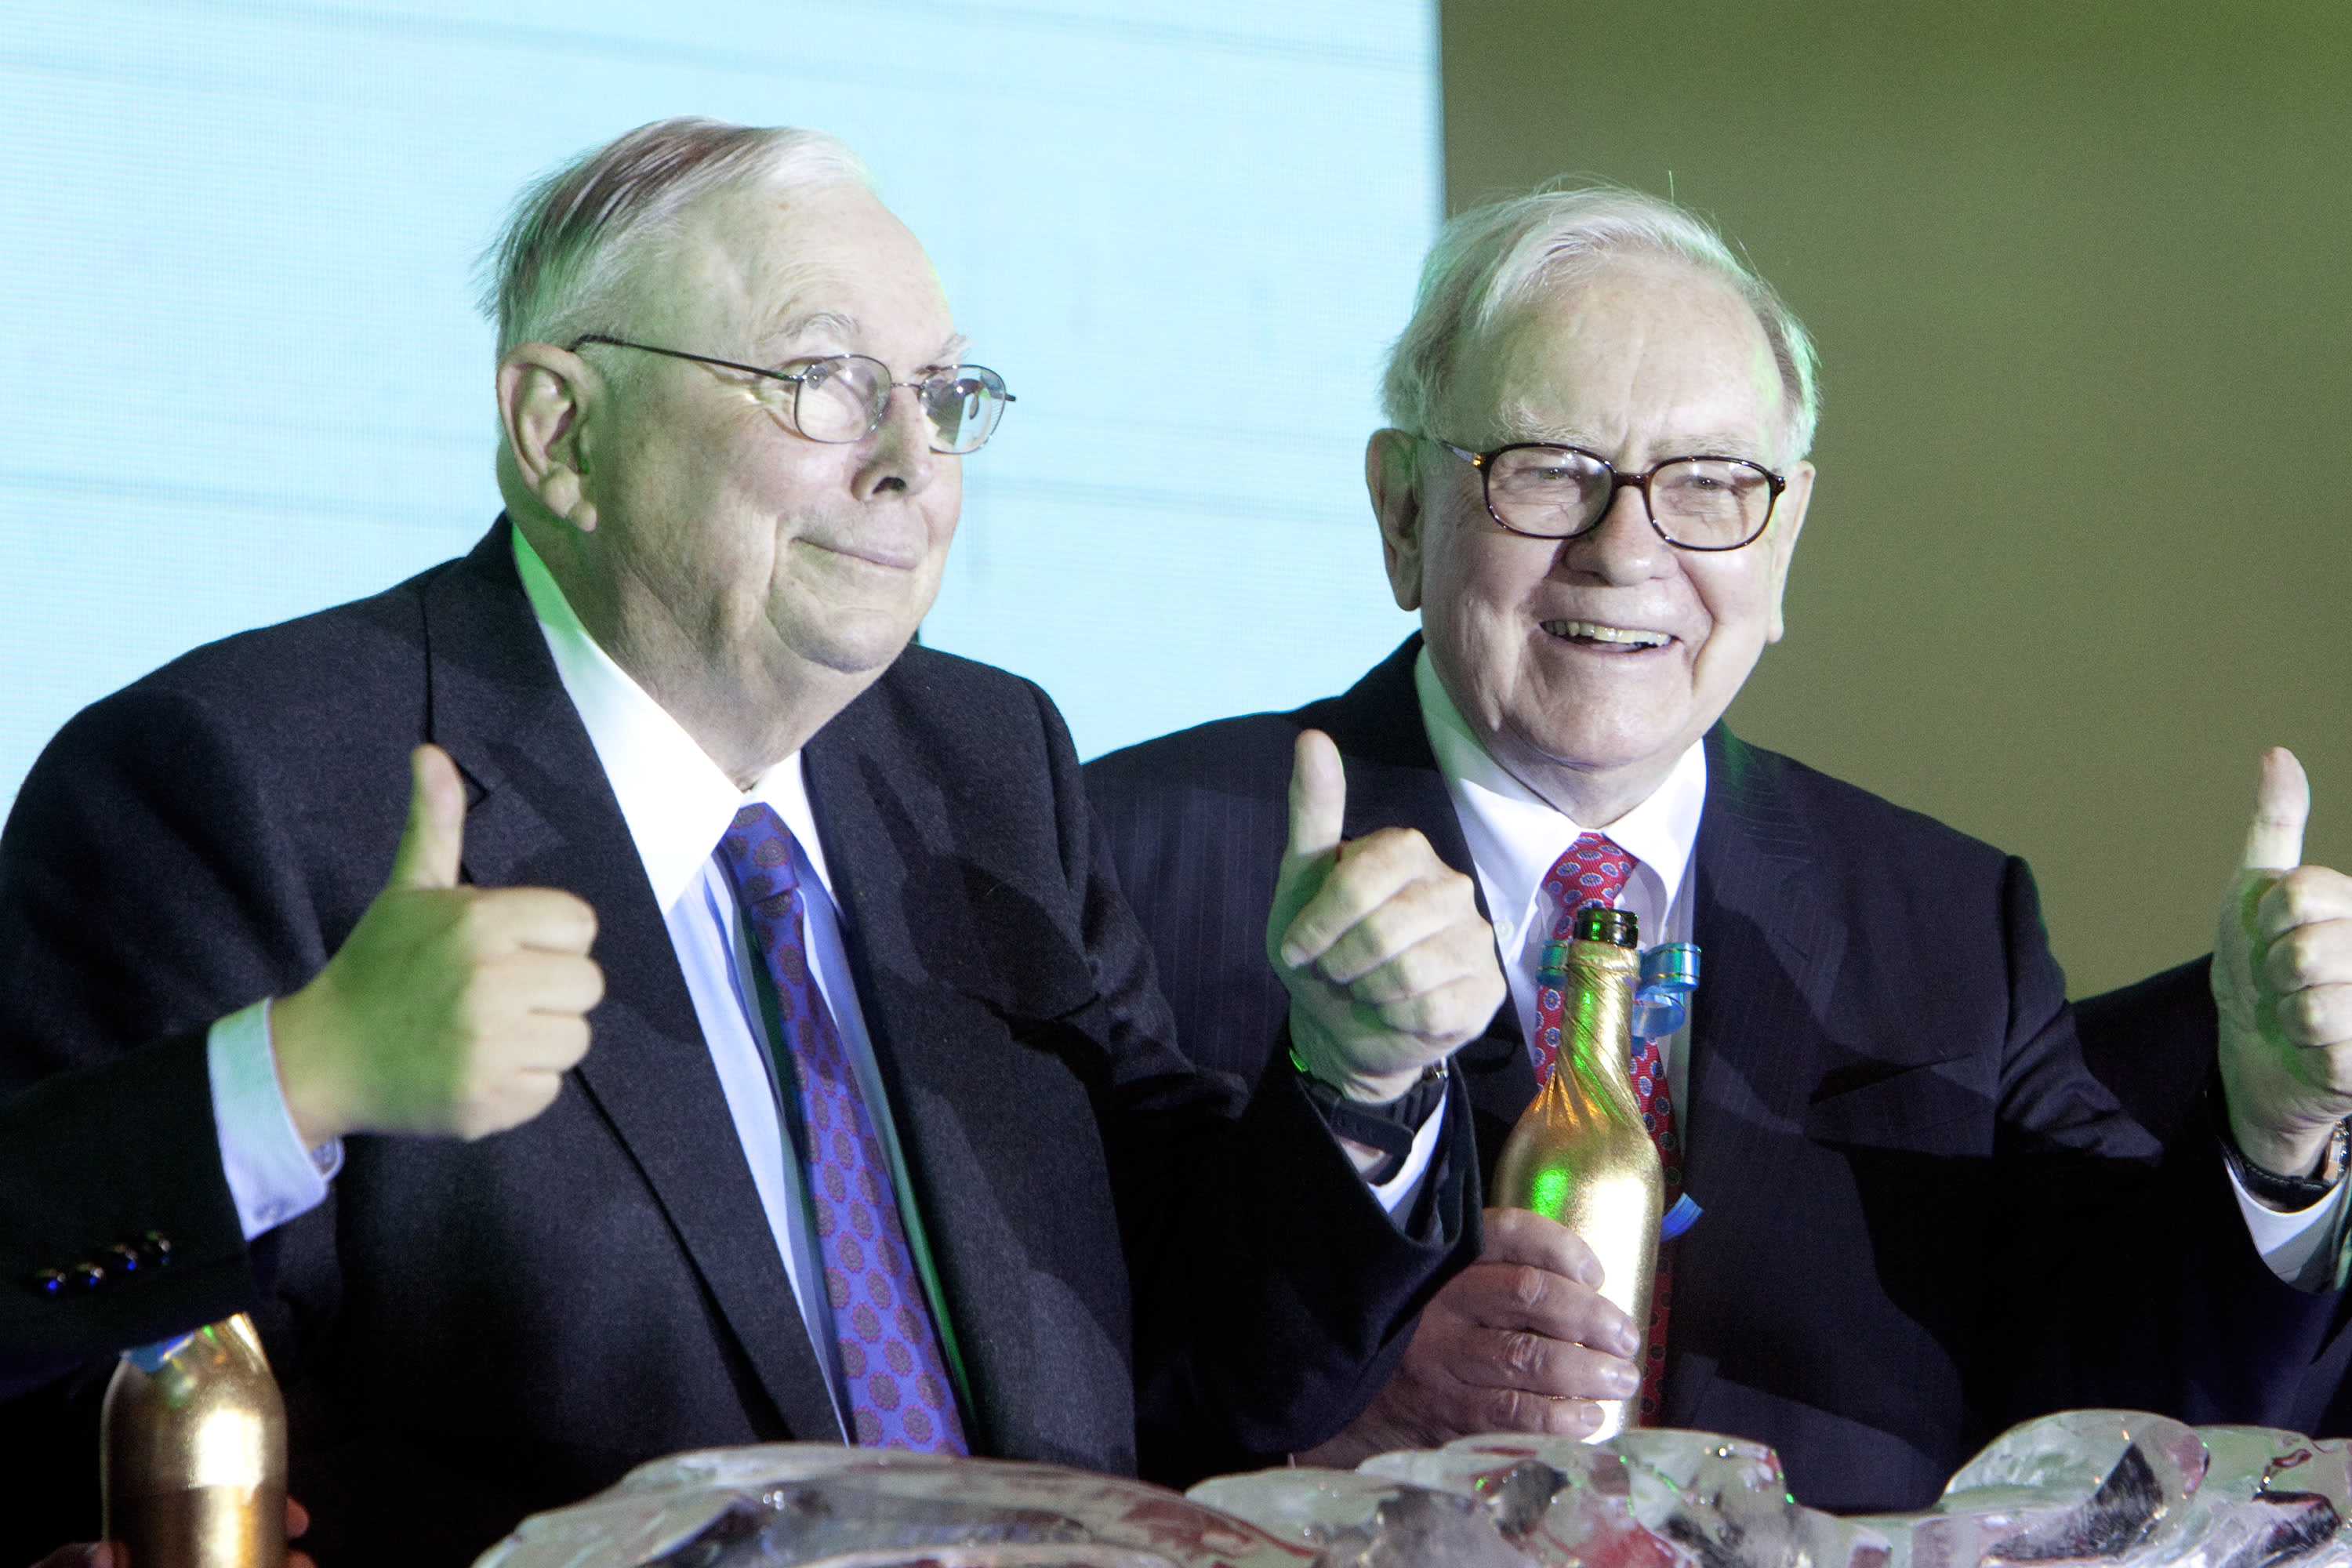 20 quotes from legendary investor Charlie Munger to charge up your 2023 investment journey